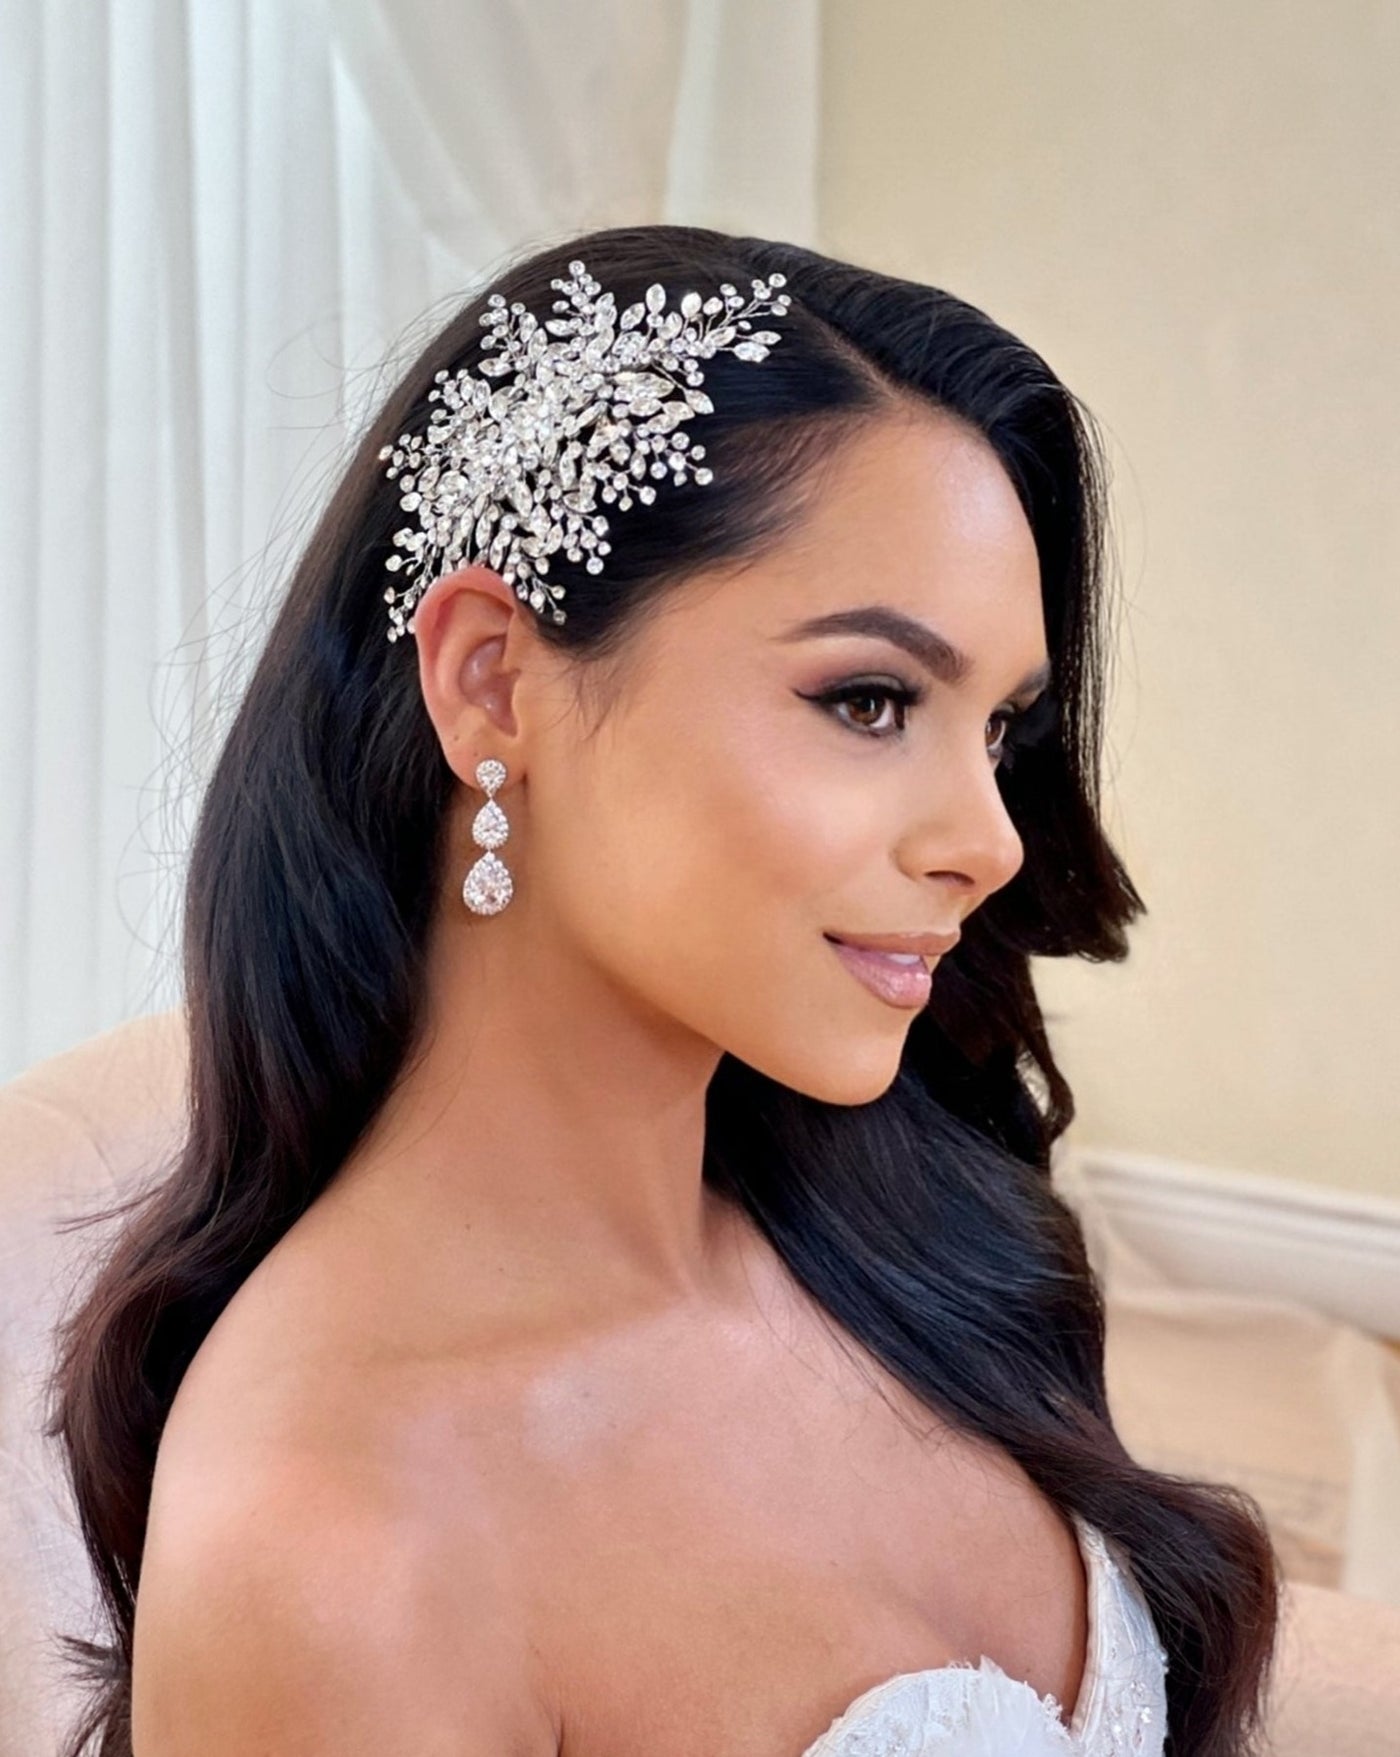 female model wearing bridal comb with various sprays of round crystals